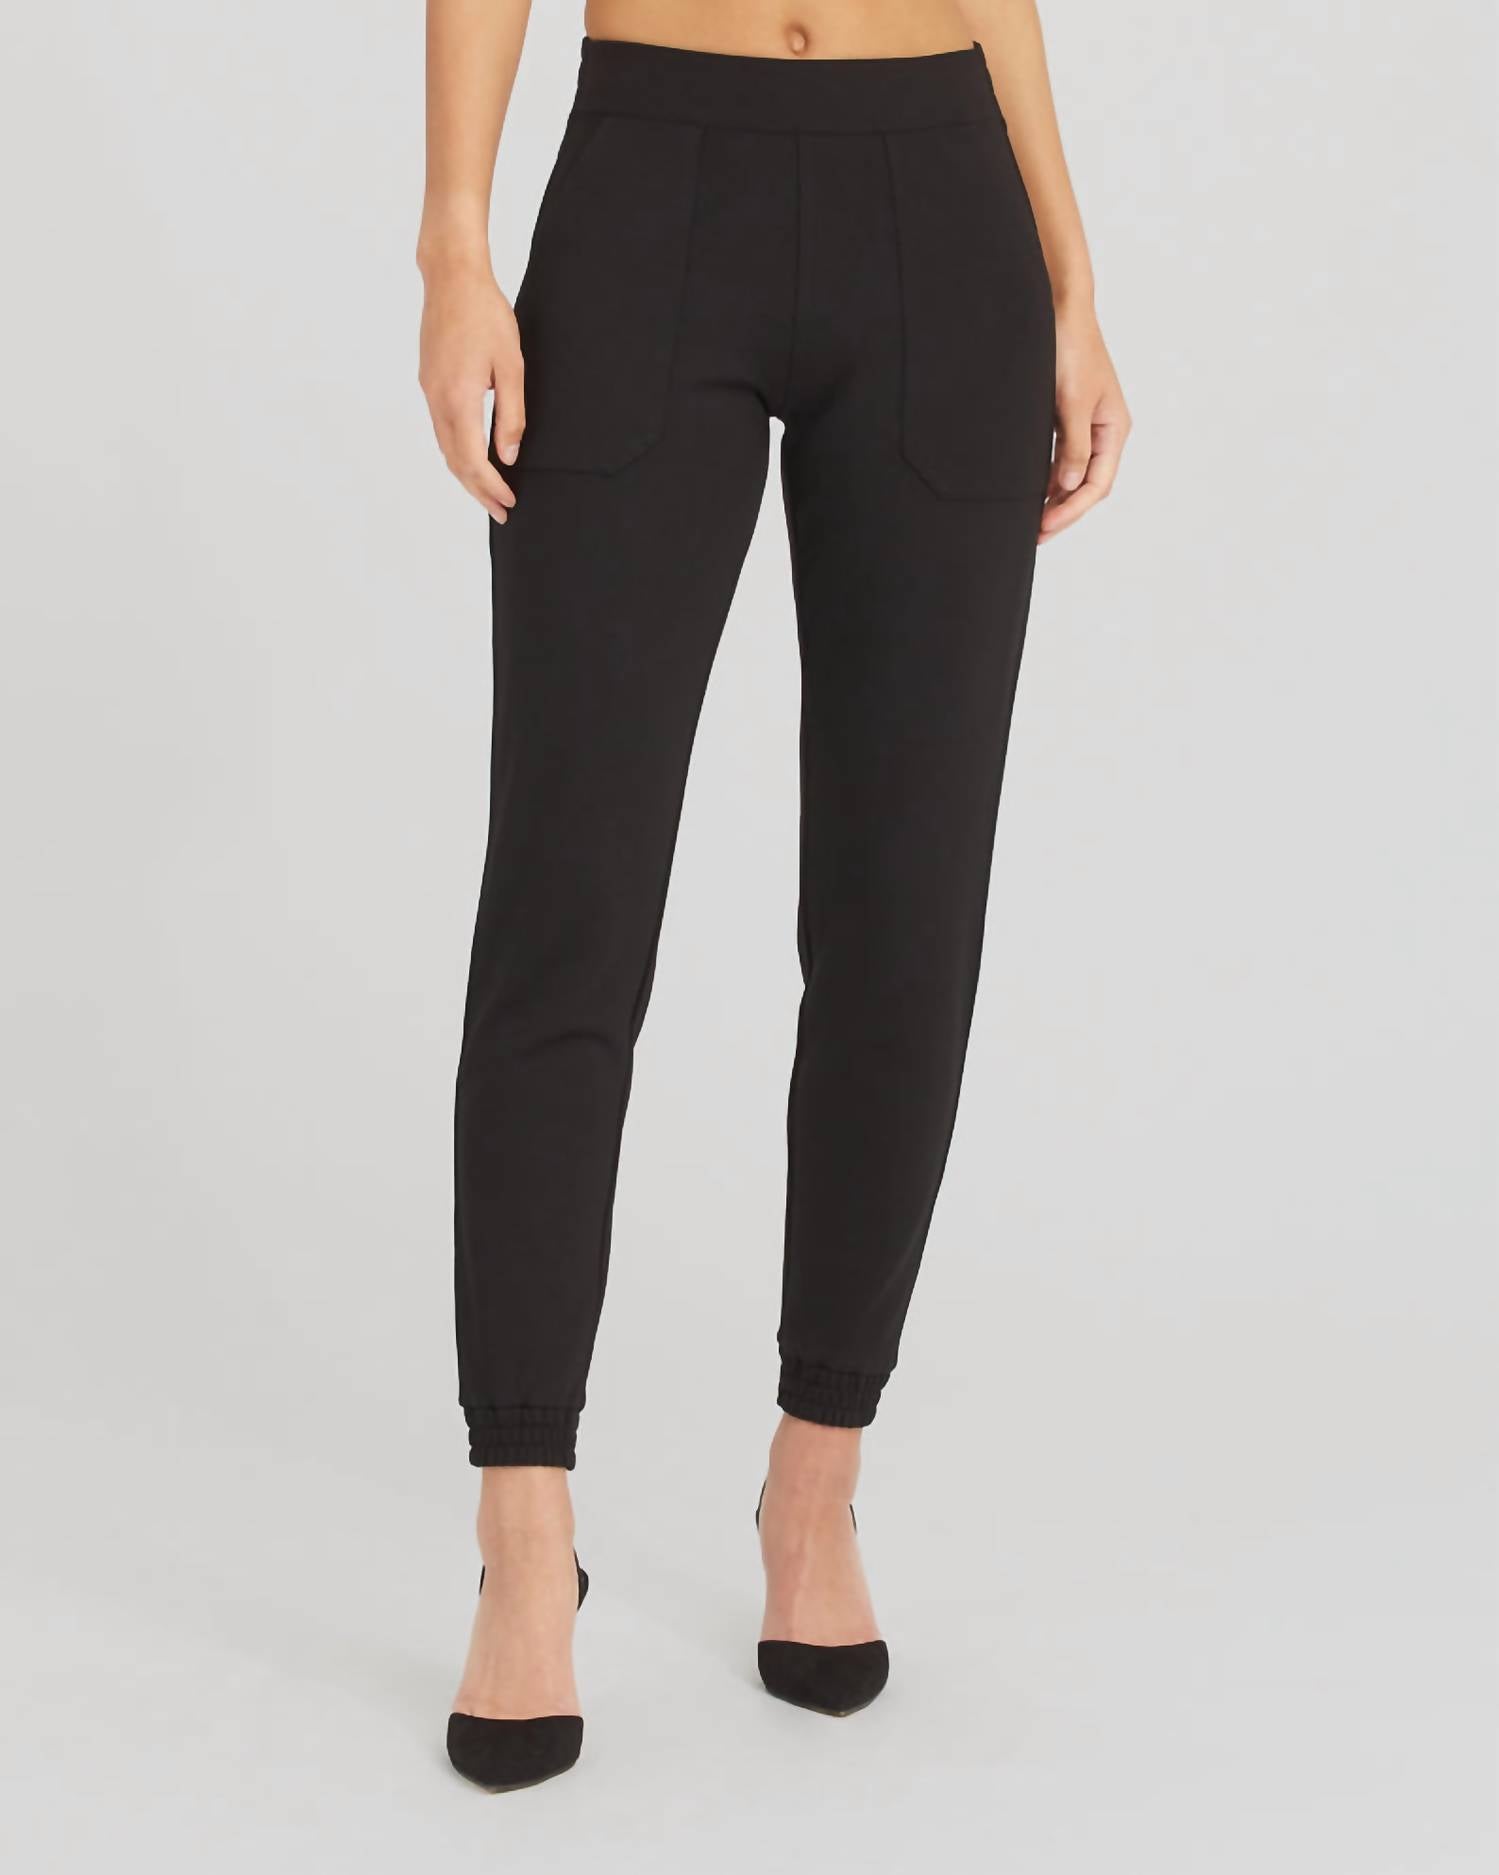 SPANX Perfect Pant in Classic Black